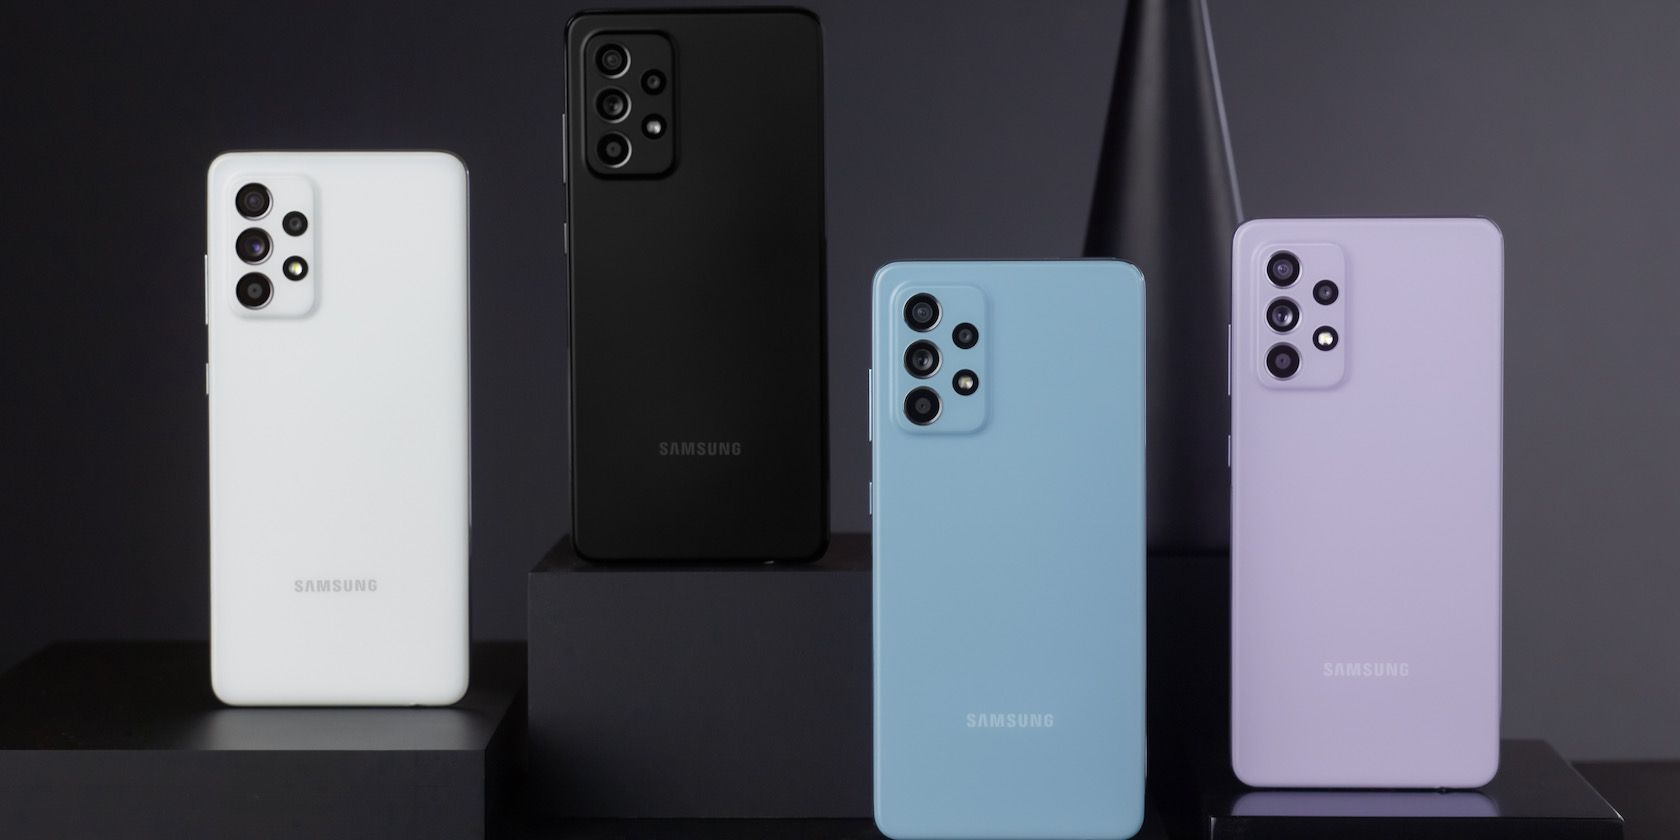 The 3 New Phones We Expect to See at Samsung's March 2022 Event